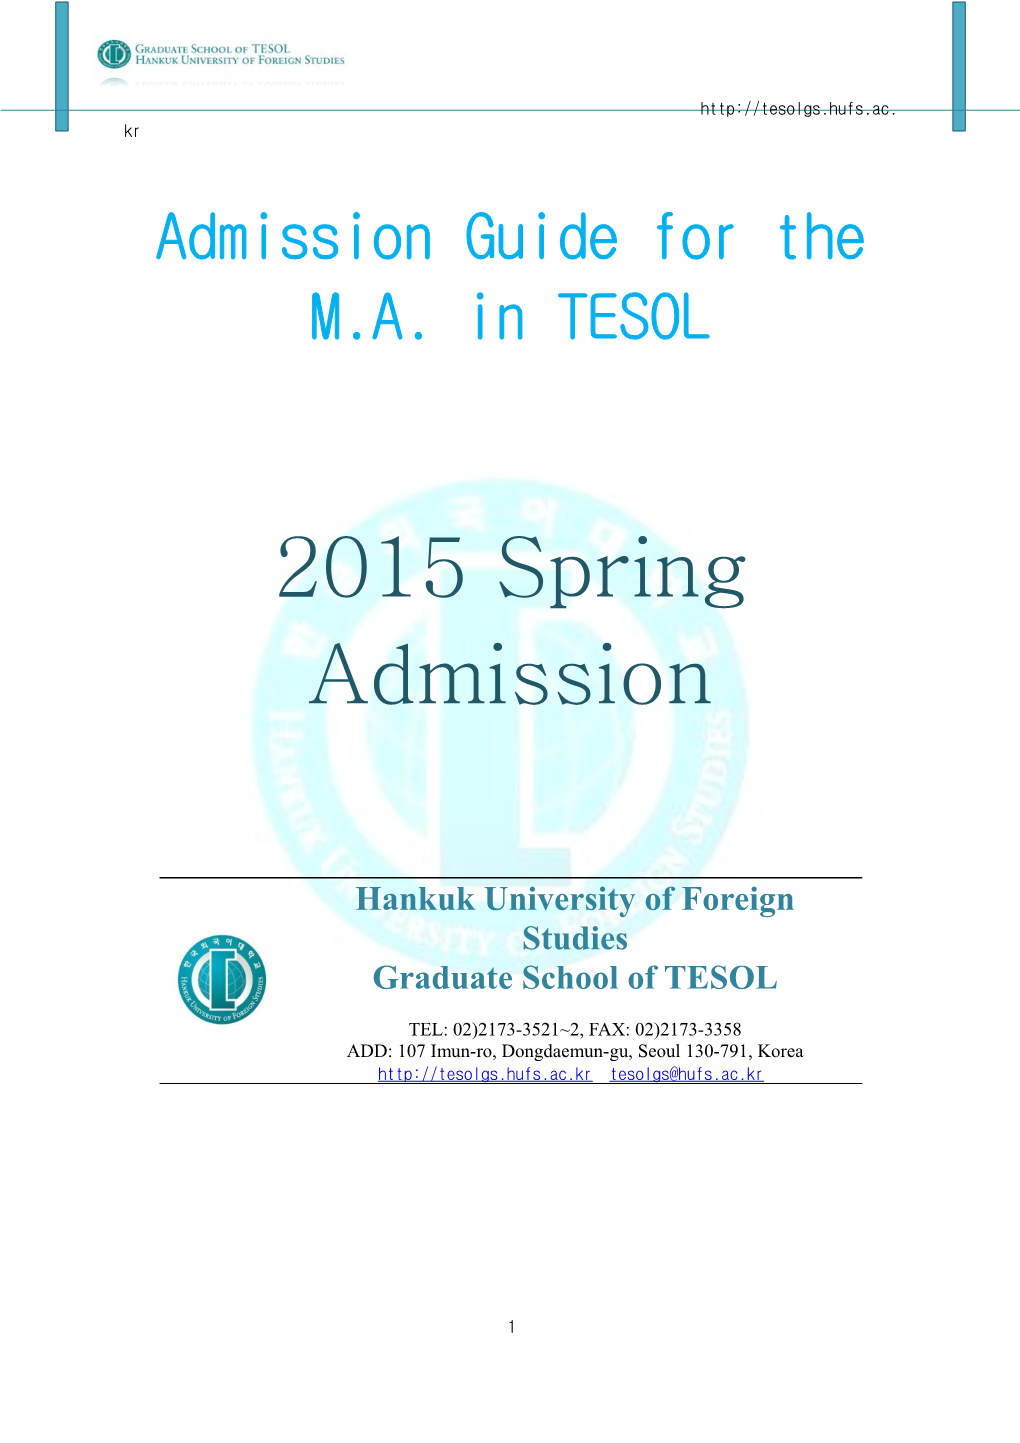 Admission Guide for the M.A. in TESOL